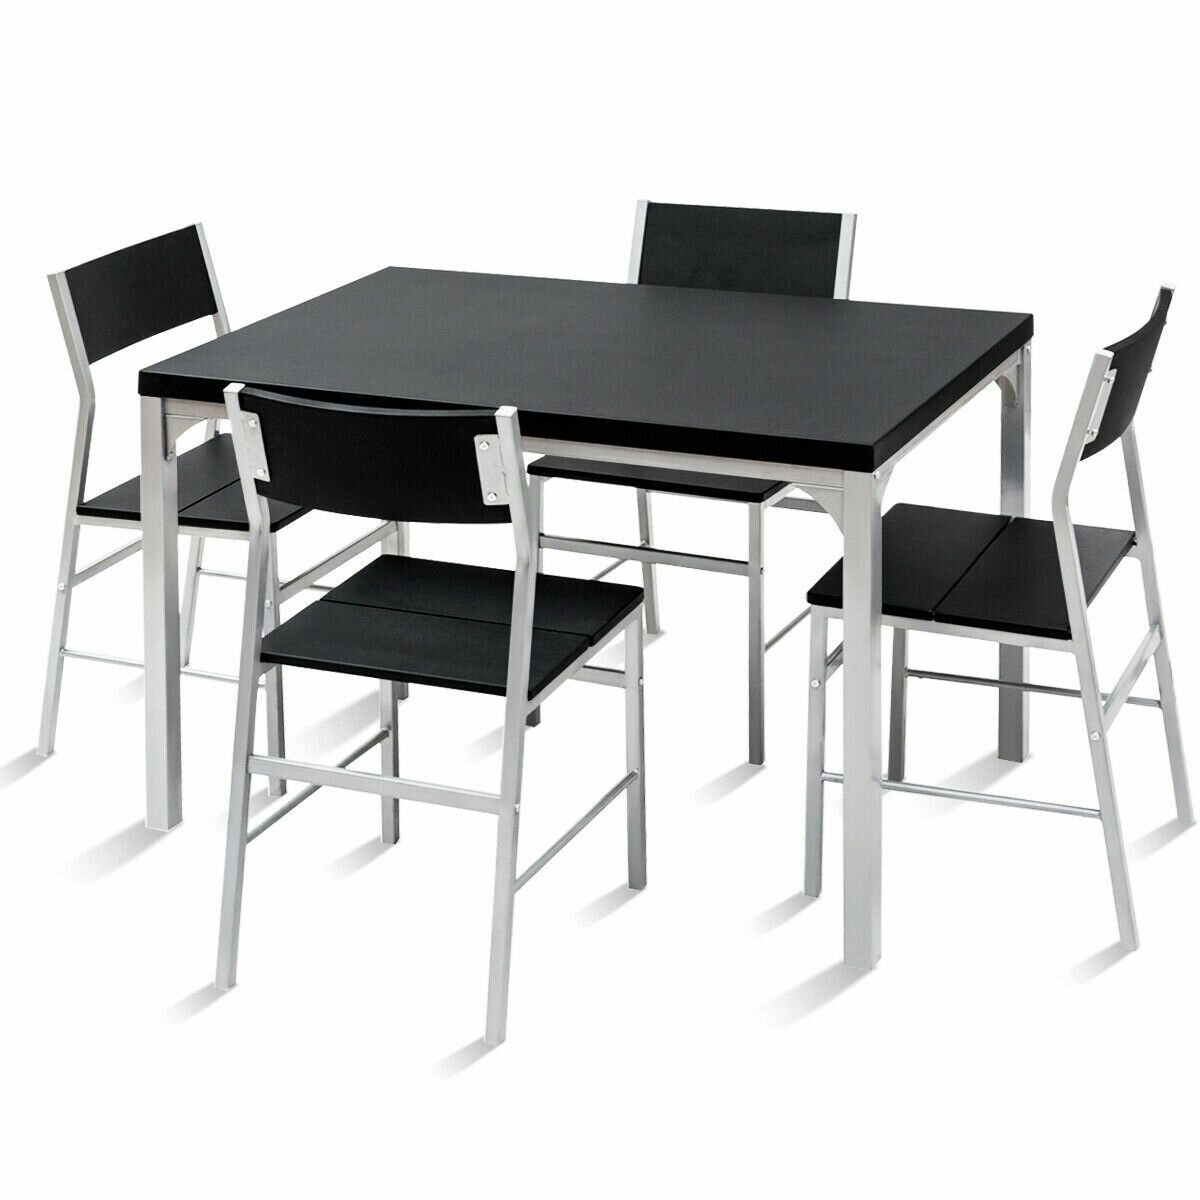 Catalina 5 Piece Dining Set With Most Up To Date Ganya 5 Piece Dining Sets (View 3 of 20)